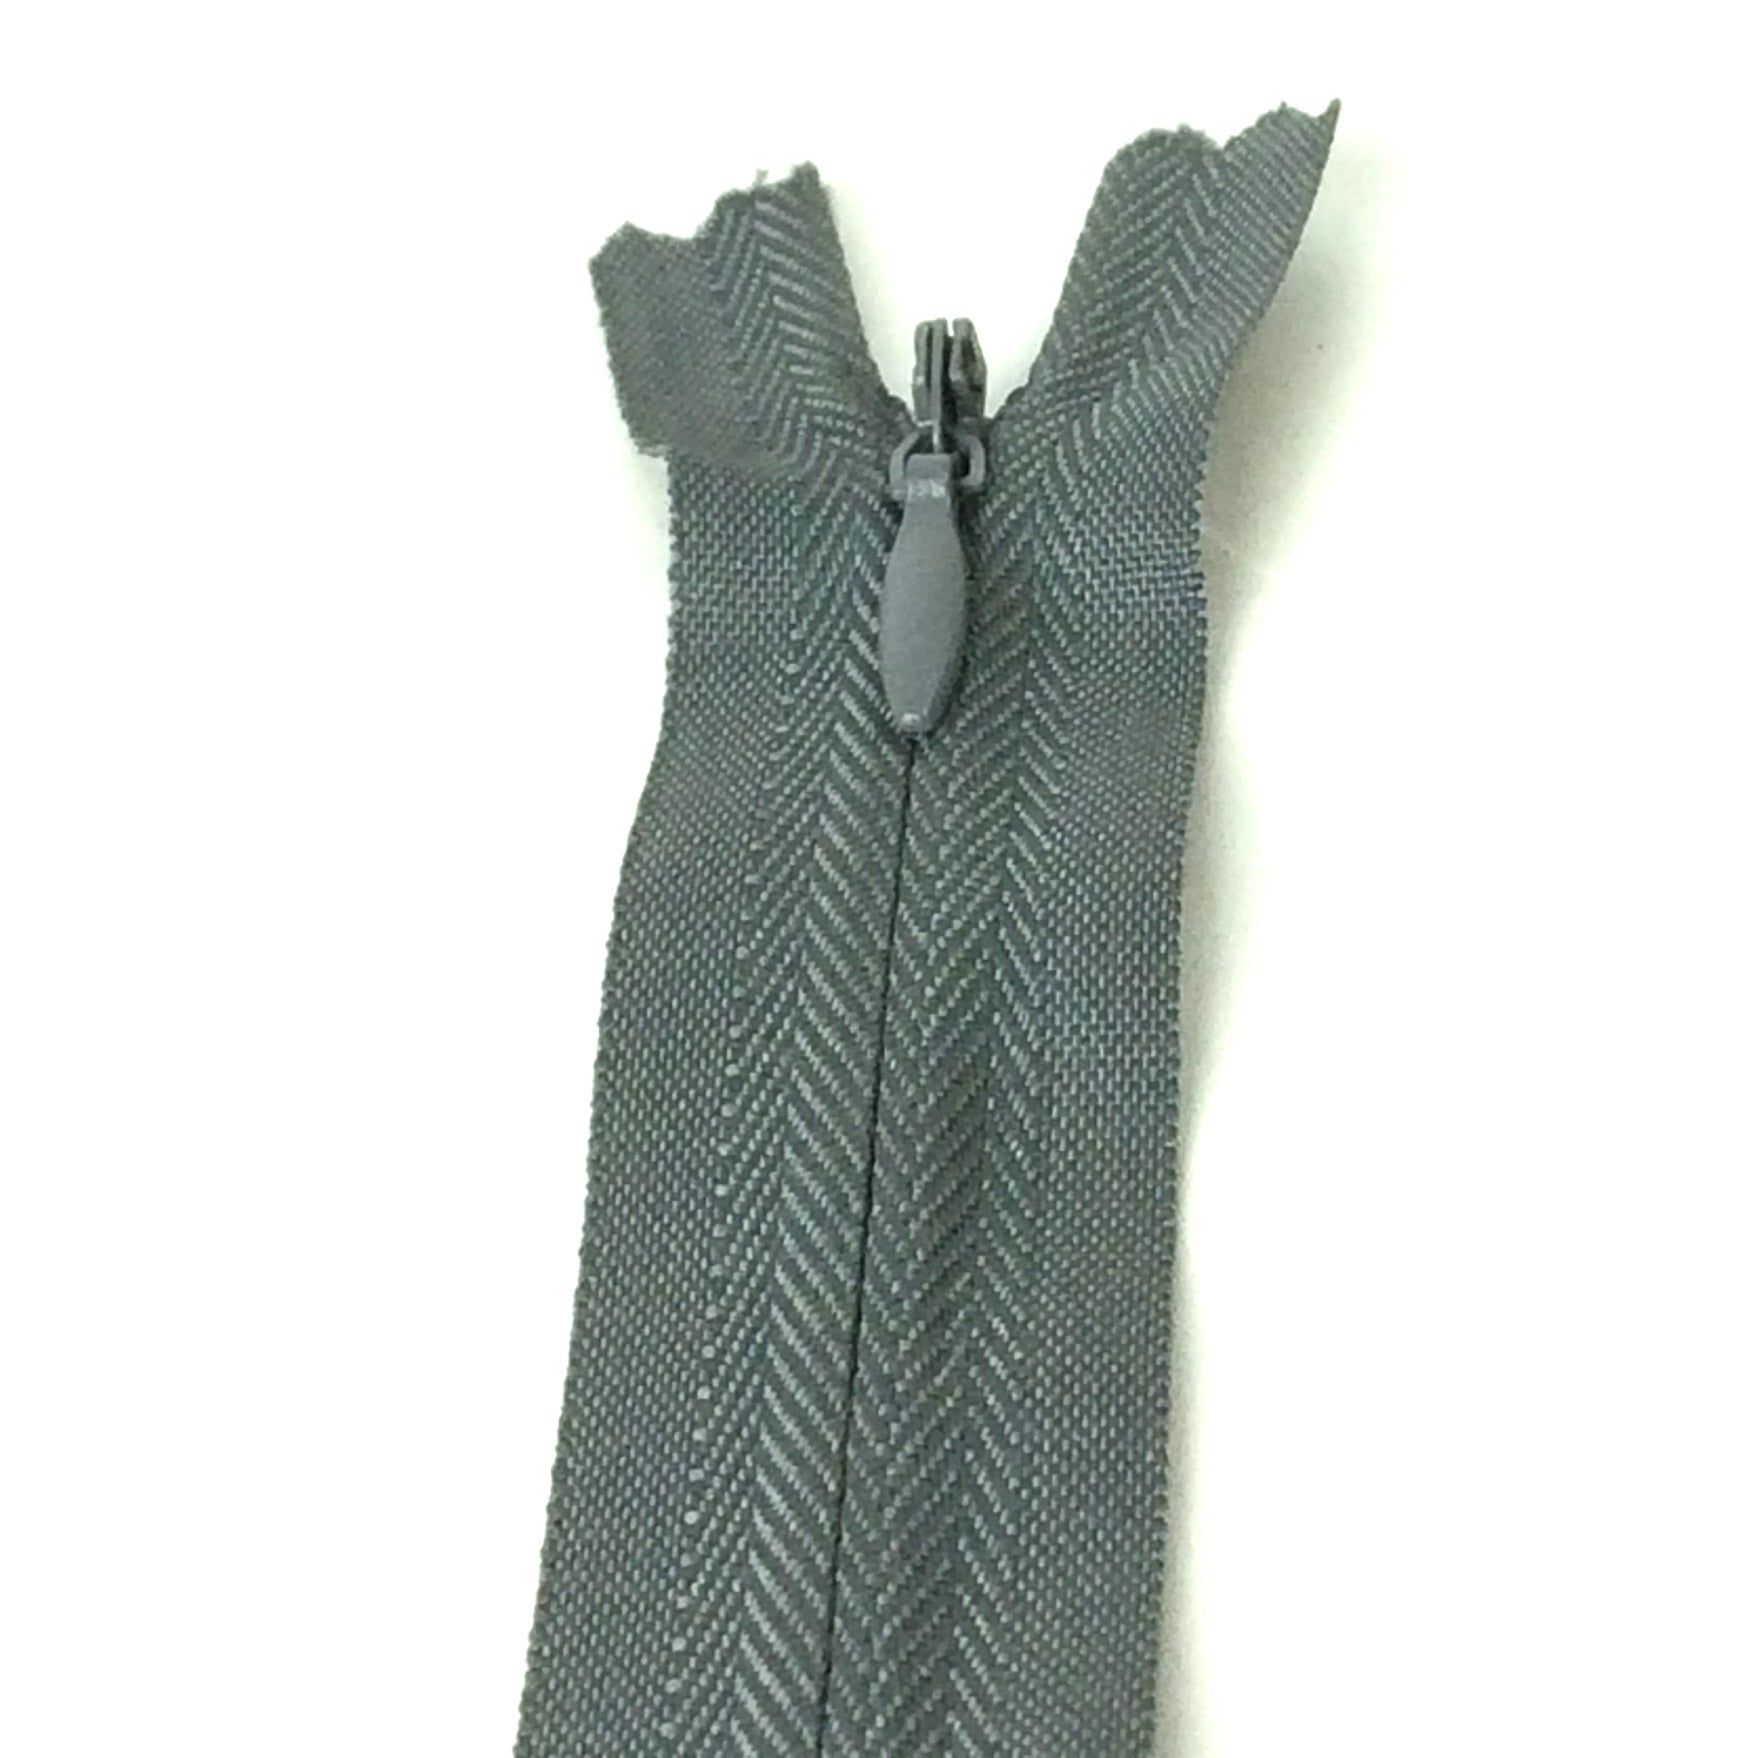 Photo of dark grey invisible or concealed zips available in many different colours and sizes. Great for achieving a professional finish in your products. Invisible zippers are perfect for dressmaking, cushions, crafts, etc., where you don't want your zipper showing. Installing them can be tricky without the right foot on your machine; a normal zipper foot is for installing standard zippers, while you will need an invisible zipper foot for a professional result